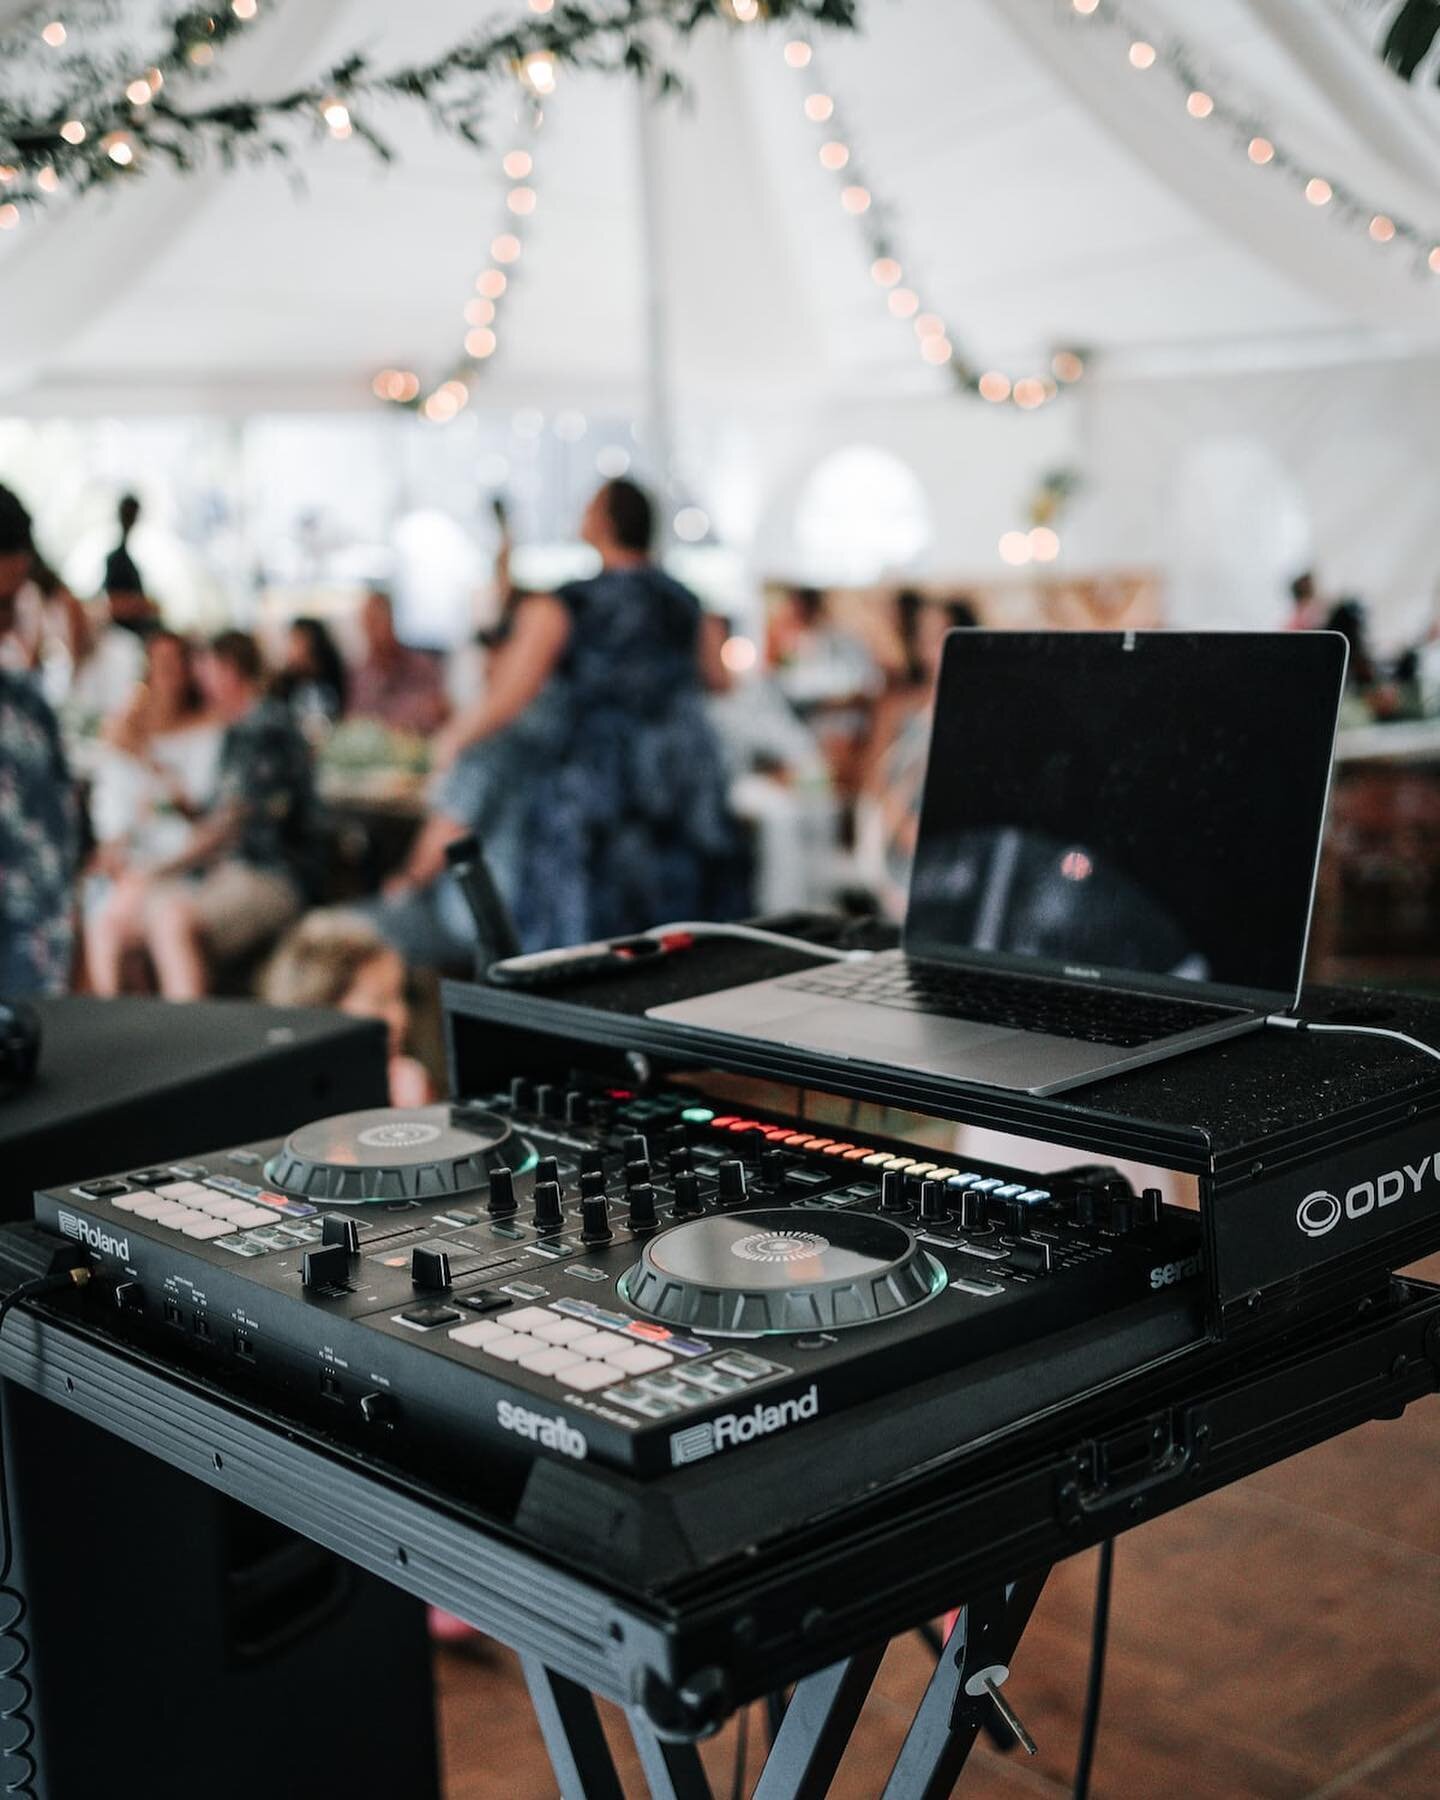 It&rsquo;s officially wedding season!!!! So let&rsquo;s get this party started 🎉🍾🪩

I&rsquo;m looking to connect with some new next level, PNW-based DJs who set the tone for a hollerin&rsquo; off the hook celebration 💃🏼🕺🏻

Check in or tag your